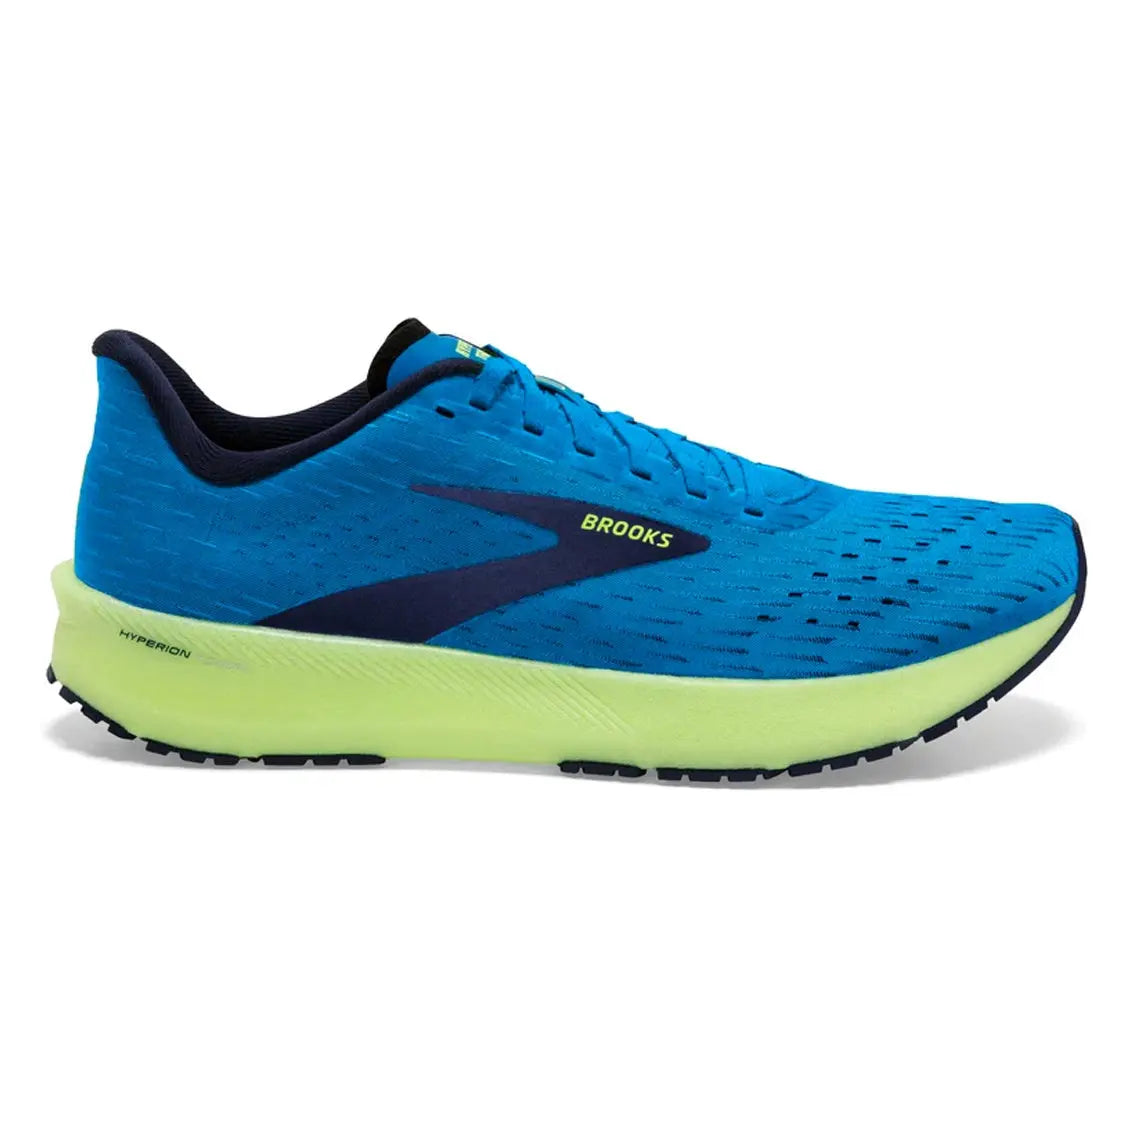 Mens Brooks Hyperion Tempo - Blue / Nightlife / Peacoat